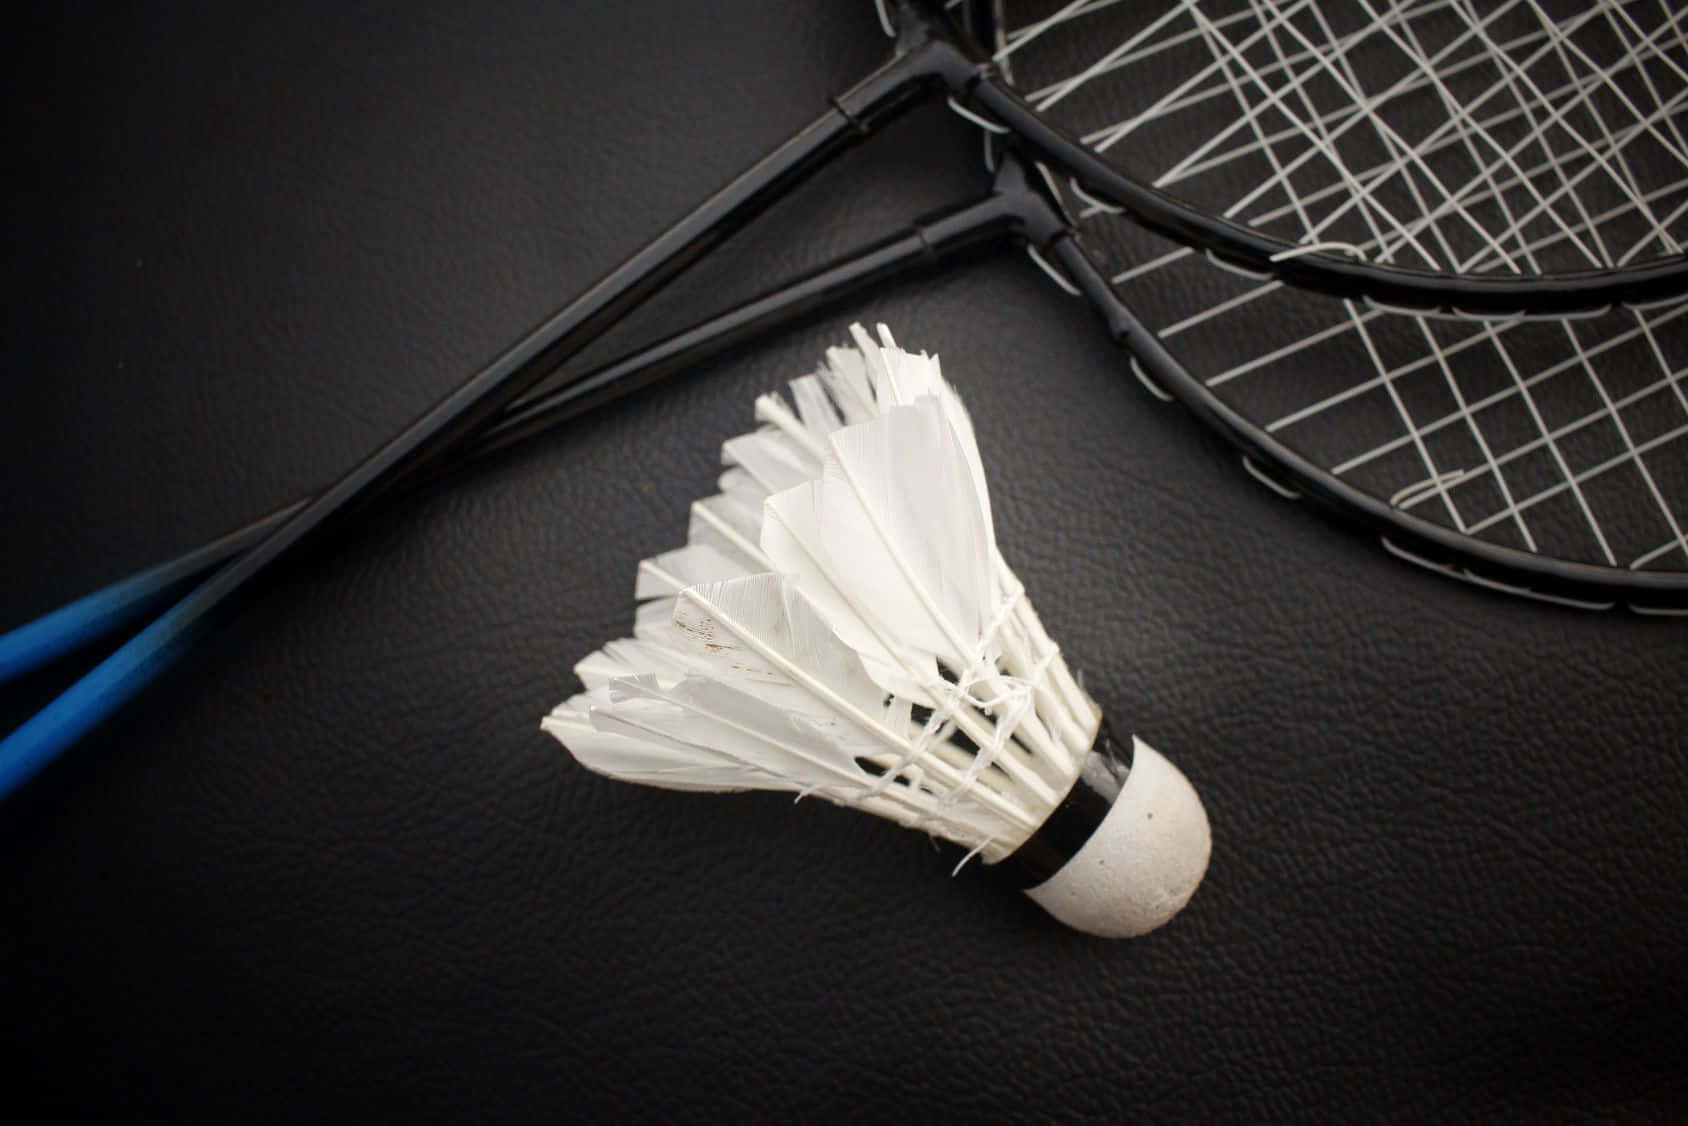 Badminton Free Stock Photos, Images, and Pictures of Badminton